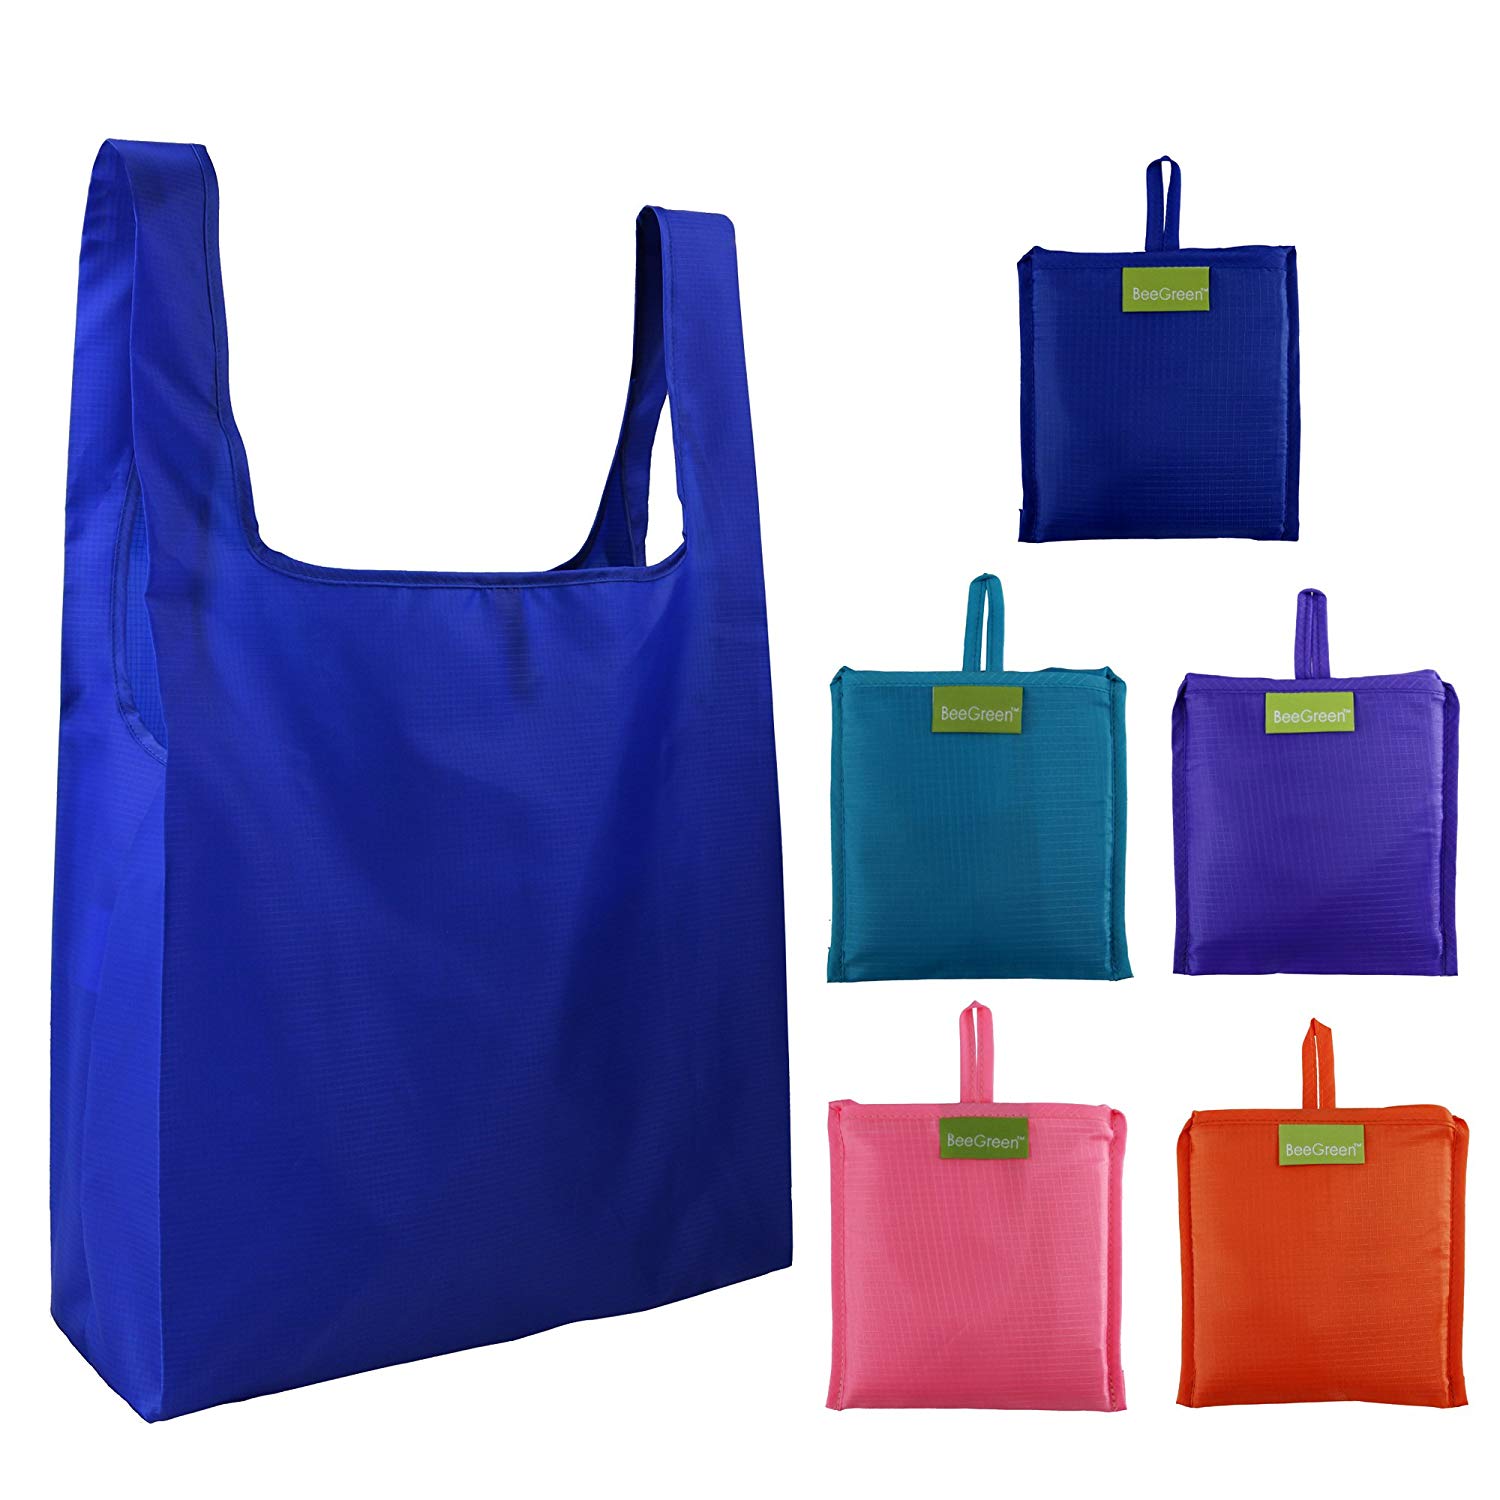 BeeGreen Reusable Grocery Bags Foldable into Attached Pouch